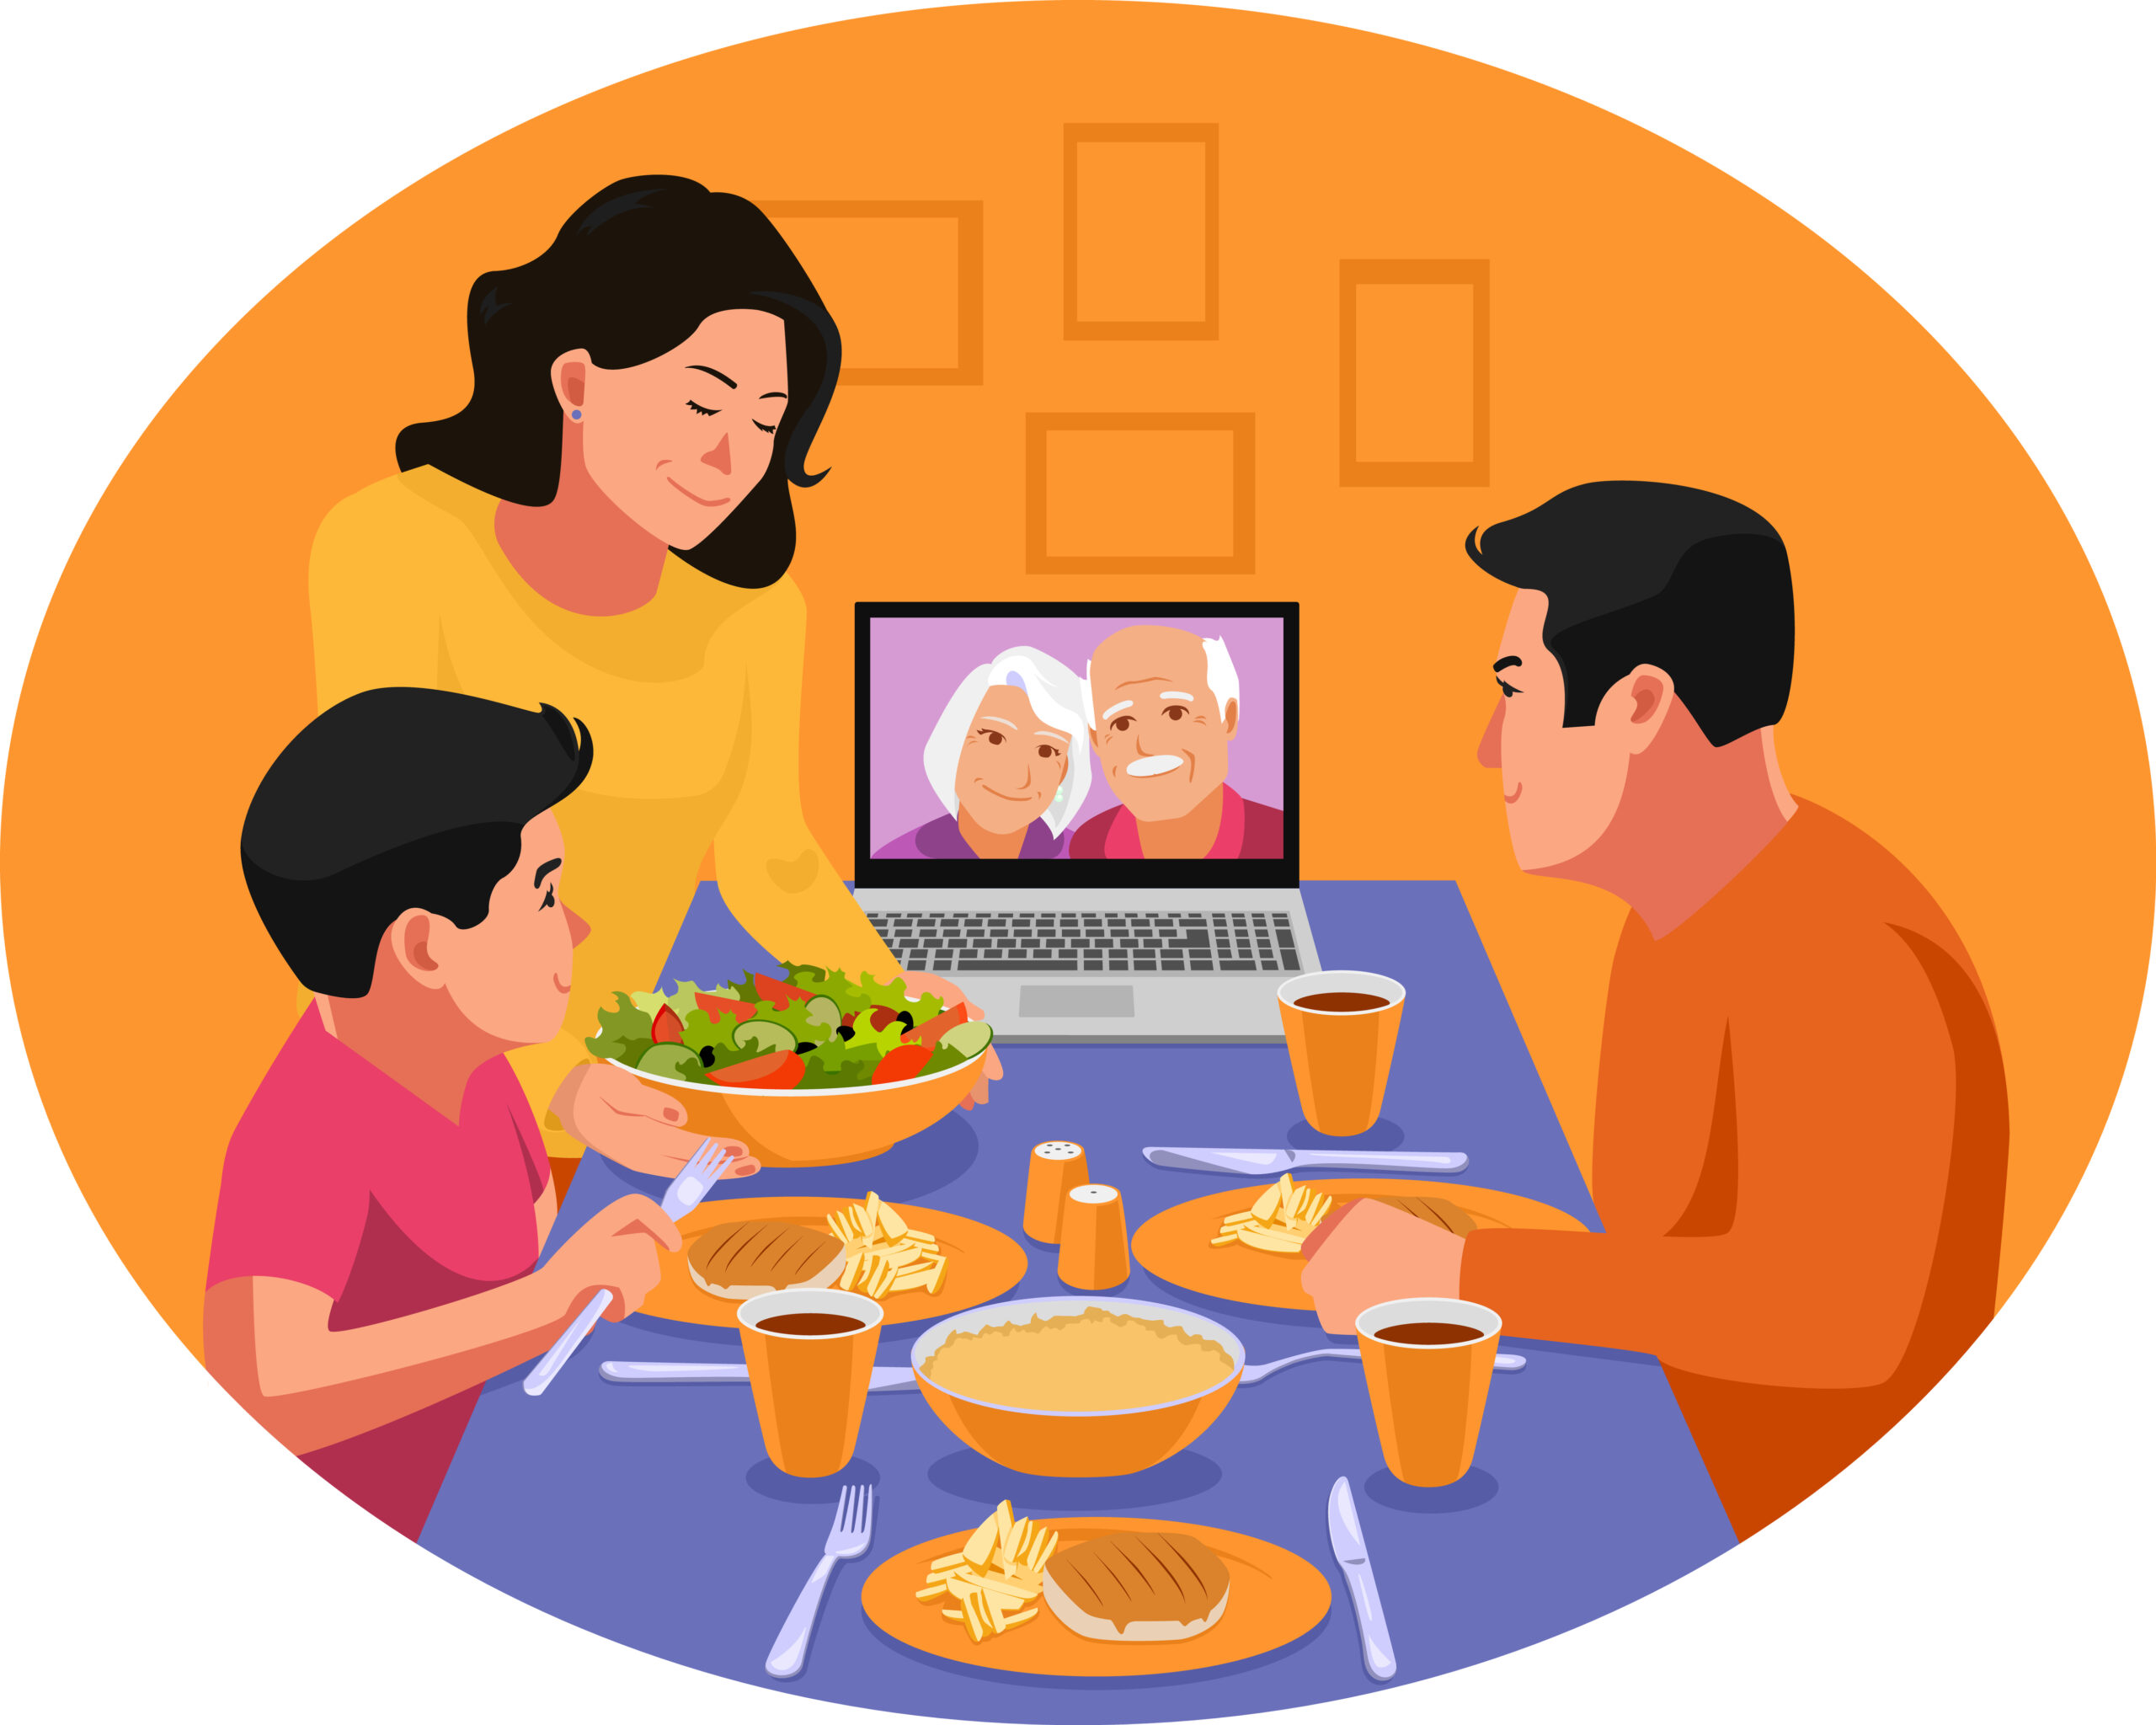 Secondary Level English Essay – Family Gatherings & Video Conferencing